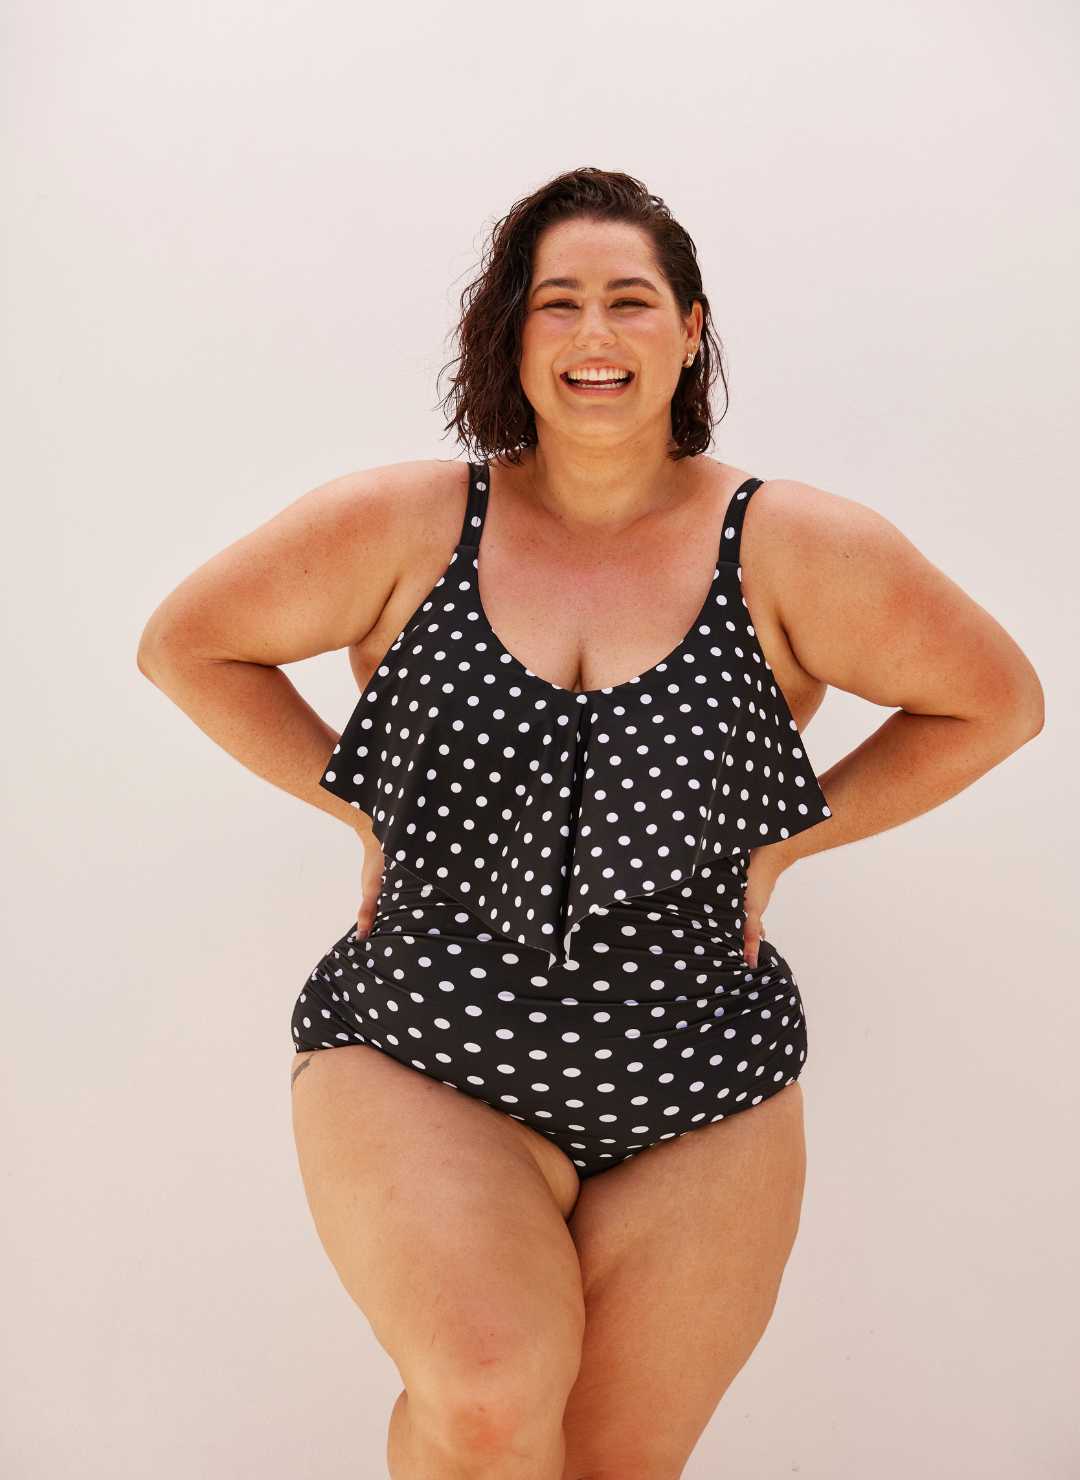 10 Best Swimsuit Tips for Wide Hips and Big Thighs